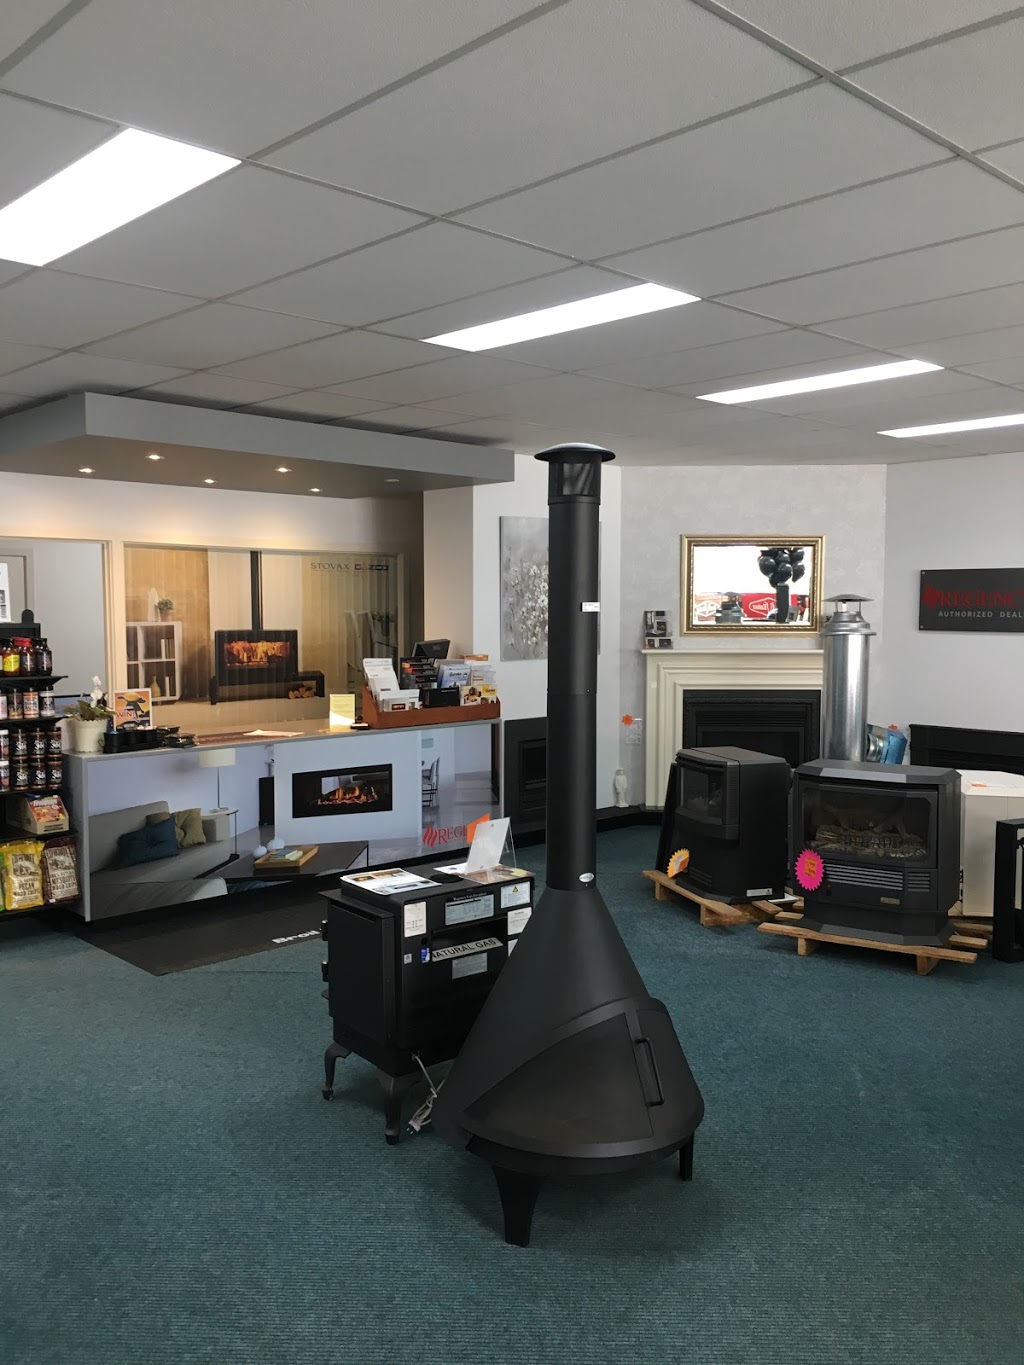 Heating by BBQs and Outdoor | 519 Keilor Rd, Niddrie VIC 3042, Australia | Phone: (03) 9379 7744